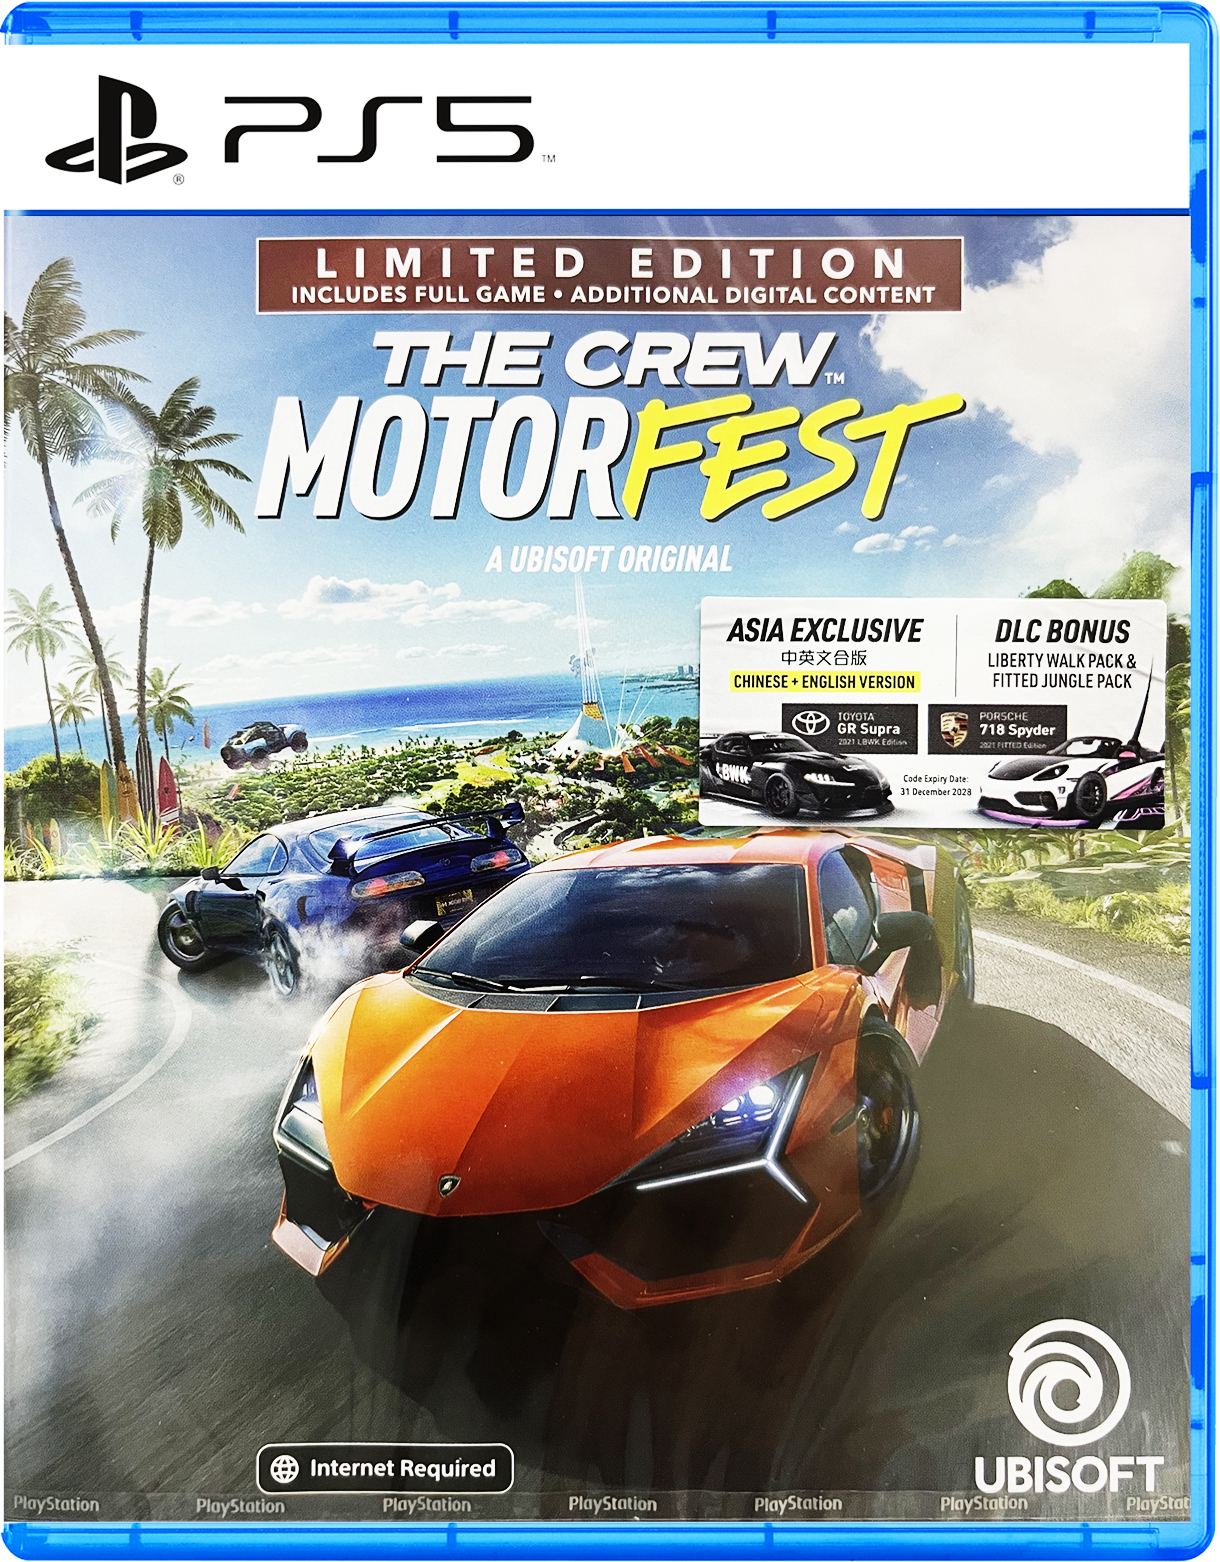 Cheapest The Crew Motorfest Ultimate Edition PS4/PS5 US